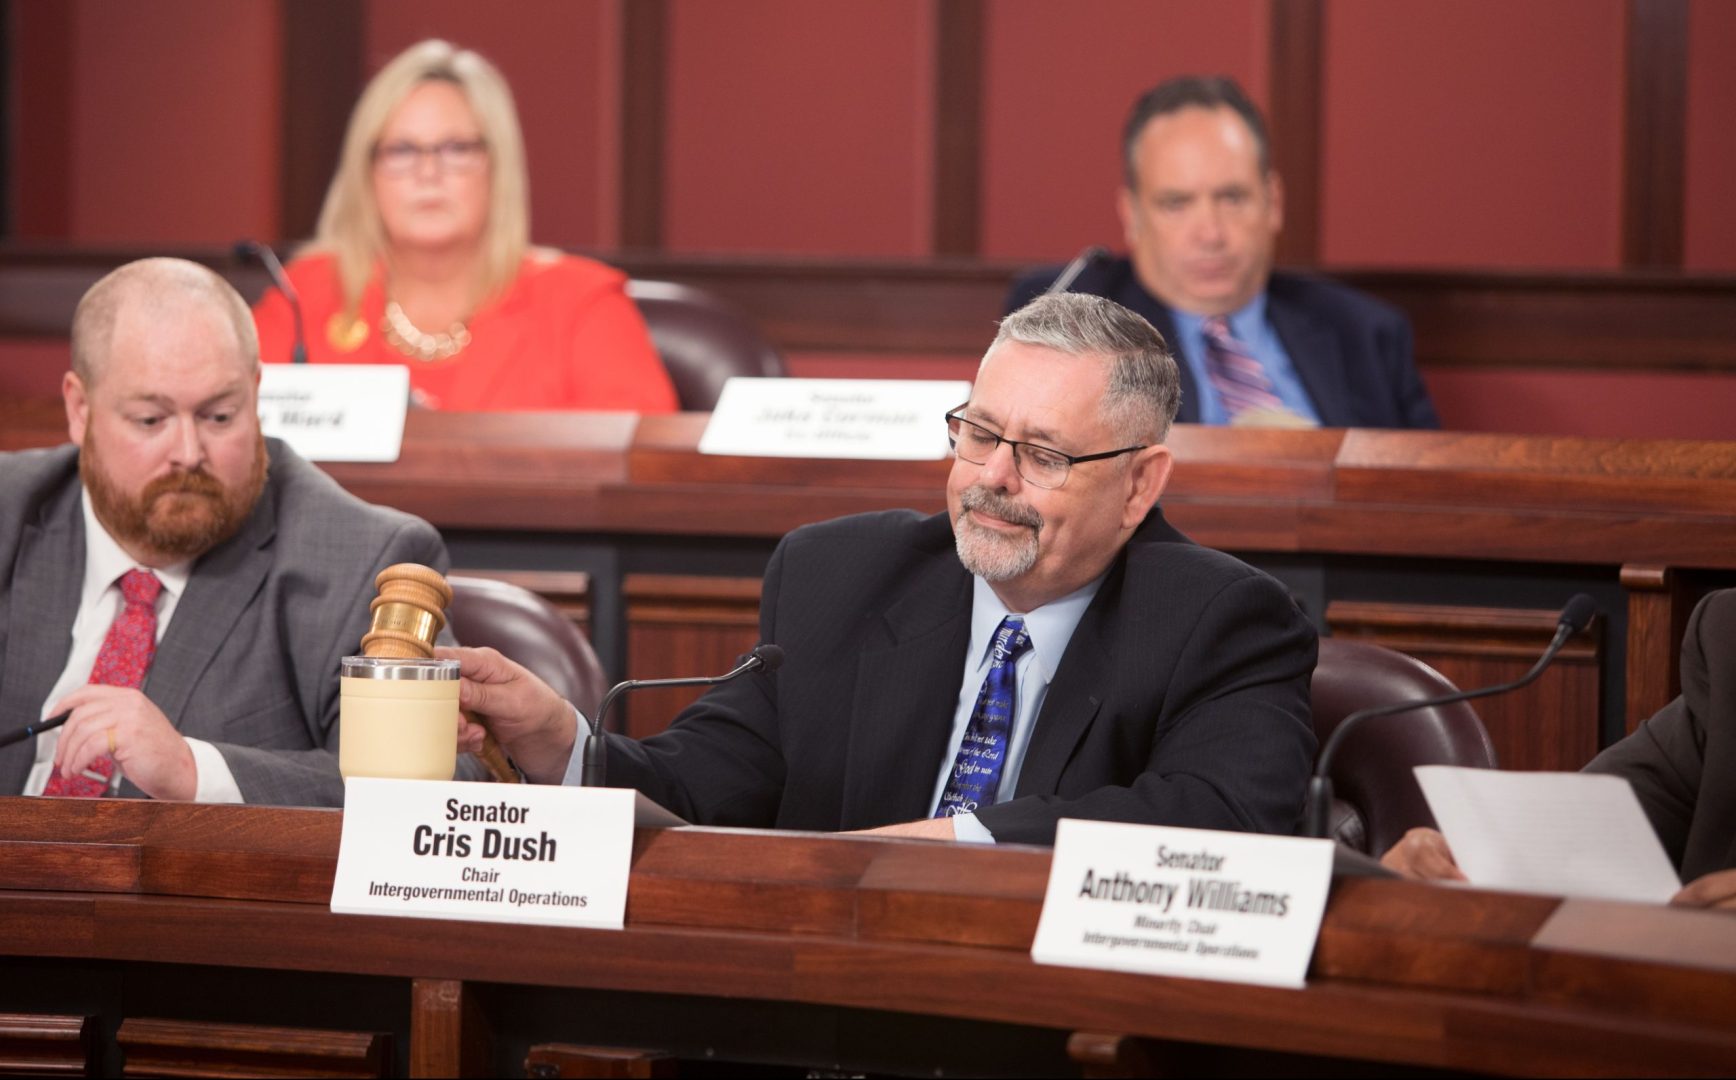 Sen. Cris Dush (R., Jefferson), who took over and renewed the election investigation in August after it was inactive for months, said any legislative fixes to the voter registration system will come after the inquiry ends.